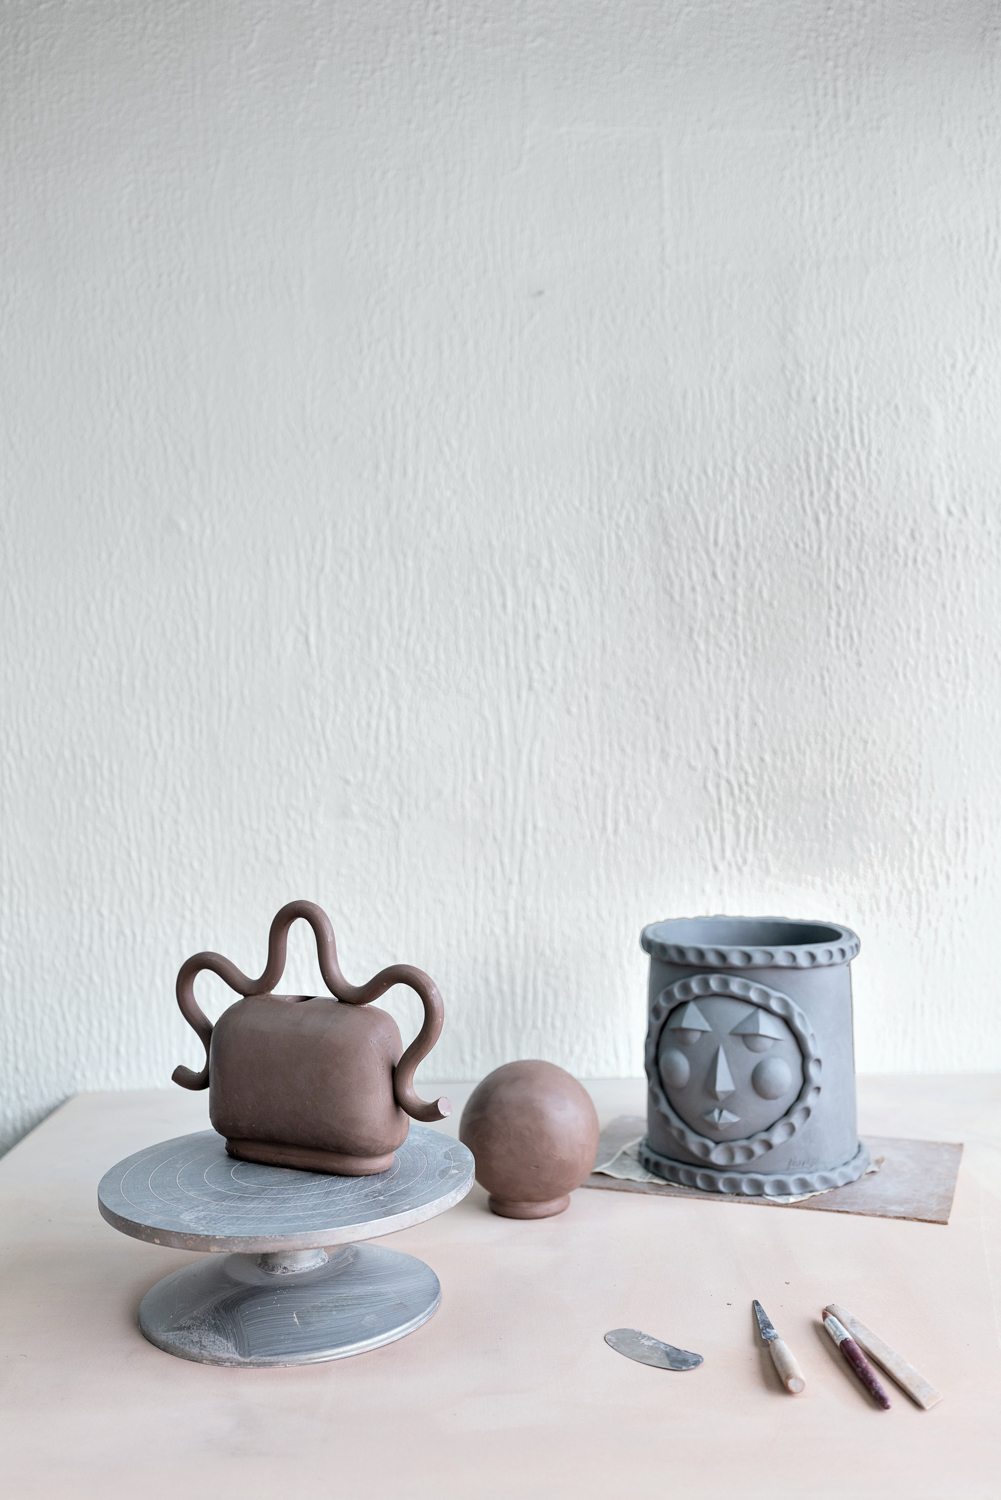 Unfired ceramic works on a table